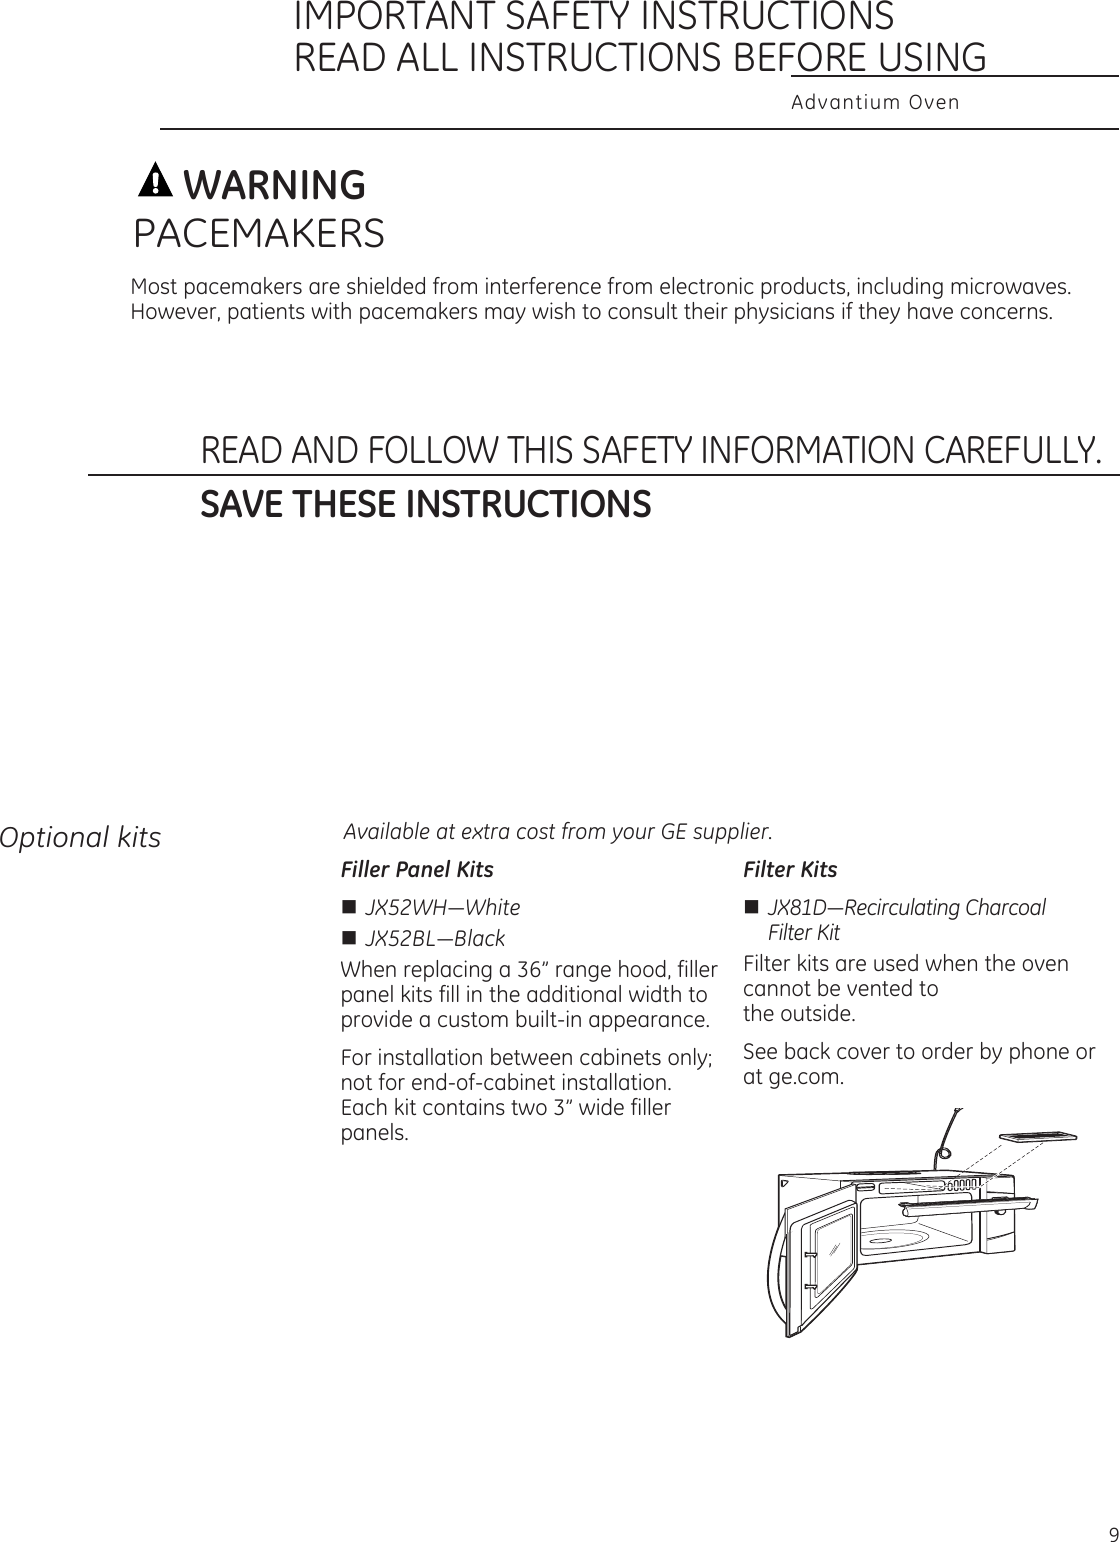 Advantium OvenIMPORTANT SAFETY INSTRUCTIONSREAD ALL INSTRUCTIONS BEFORE USINGREAD AND FOLLOW THIS SAFETY INFORMATION CAREFULLY.SAVE THESE INSTRUCTIONSWARNINGMost pacemakers are shielded from interference from electronic products, including microwaves. However, patients with pacemakers may wish to consult their physicians if they have concerns.PACEMAKERSFiller Panel KitsnJX52WH—Whiten JX52BL—BlackWhen replacing a 36” range hood, filler panel kits fill in the additional width to provide a custom built-in appearance. For installation between cabinets only; not for end-of-cabinet installation. Each kit contains two 3” wide filler panels.Filter KitsnJX81D—Recirculating Charcoal   Filter KitFilter kits are used when the oven cannot be vented to  the outside.See back cover to order by phone or at ge.com.Available at extra cost from your GE supplier.Optional kits9